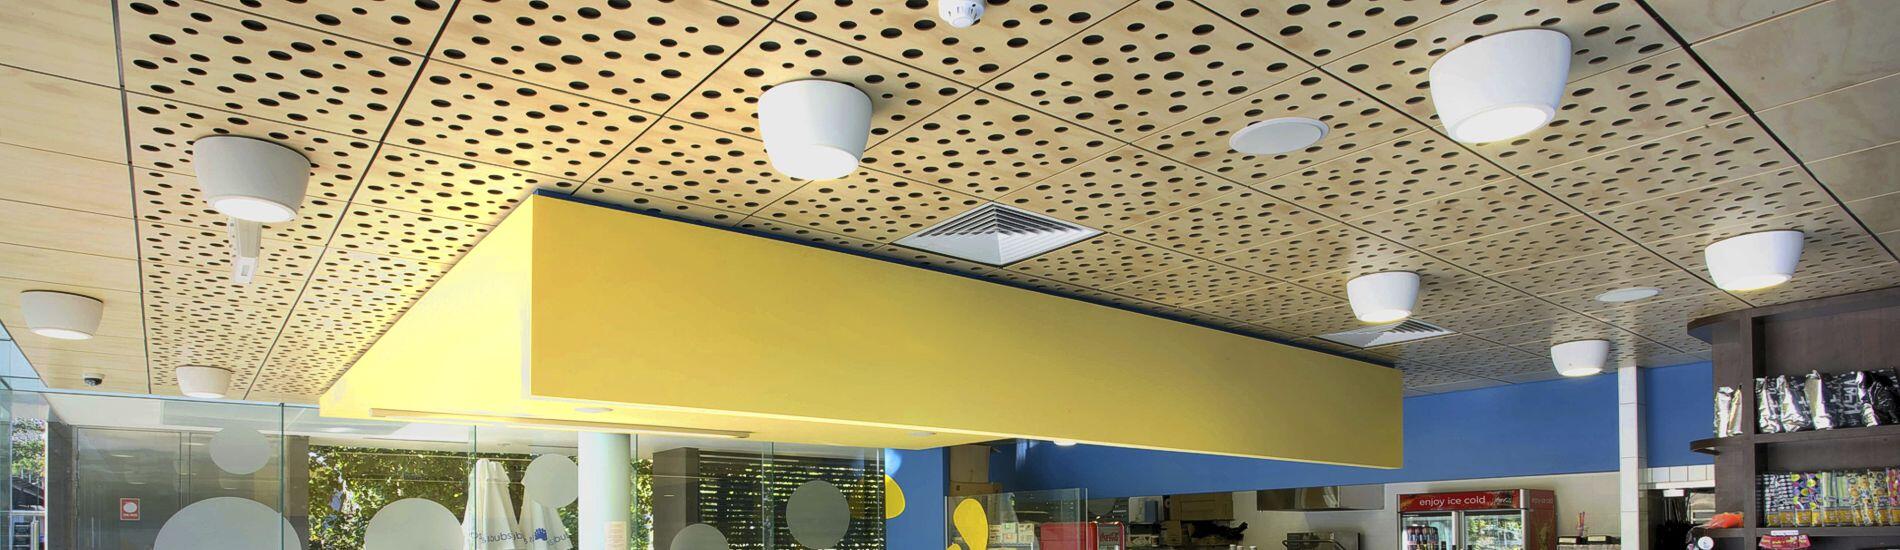 Bold decorative use of SUPATILE fully accessible ceilng tiles in child friendly café